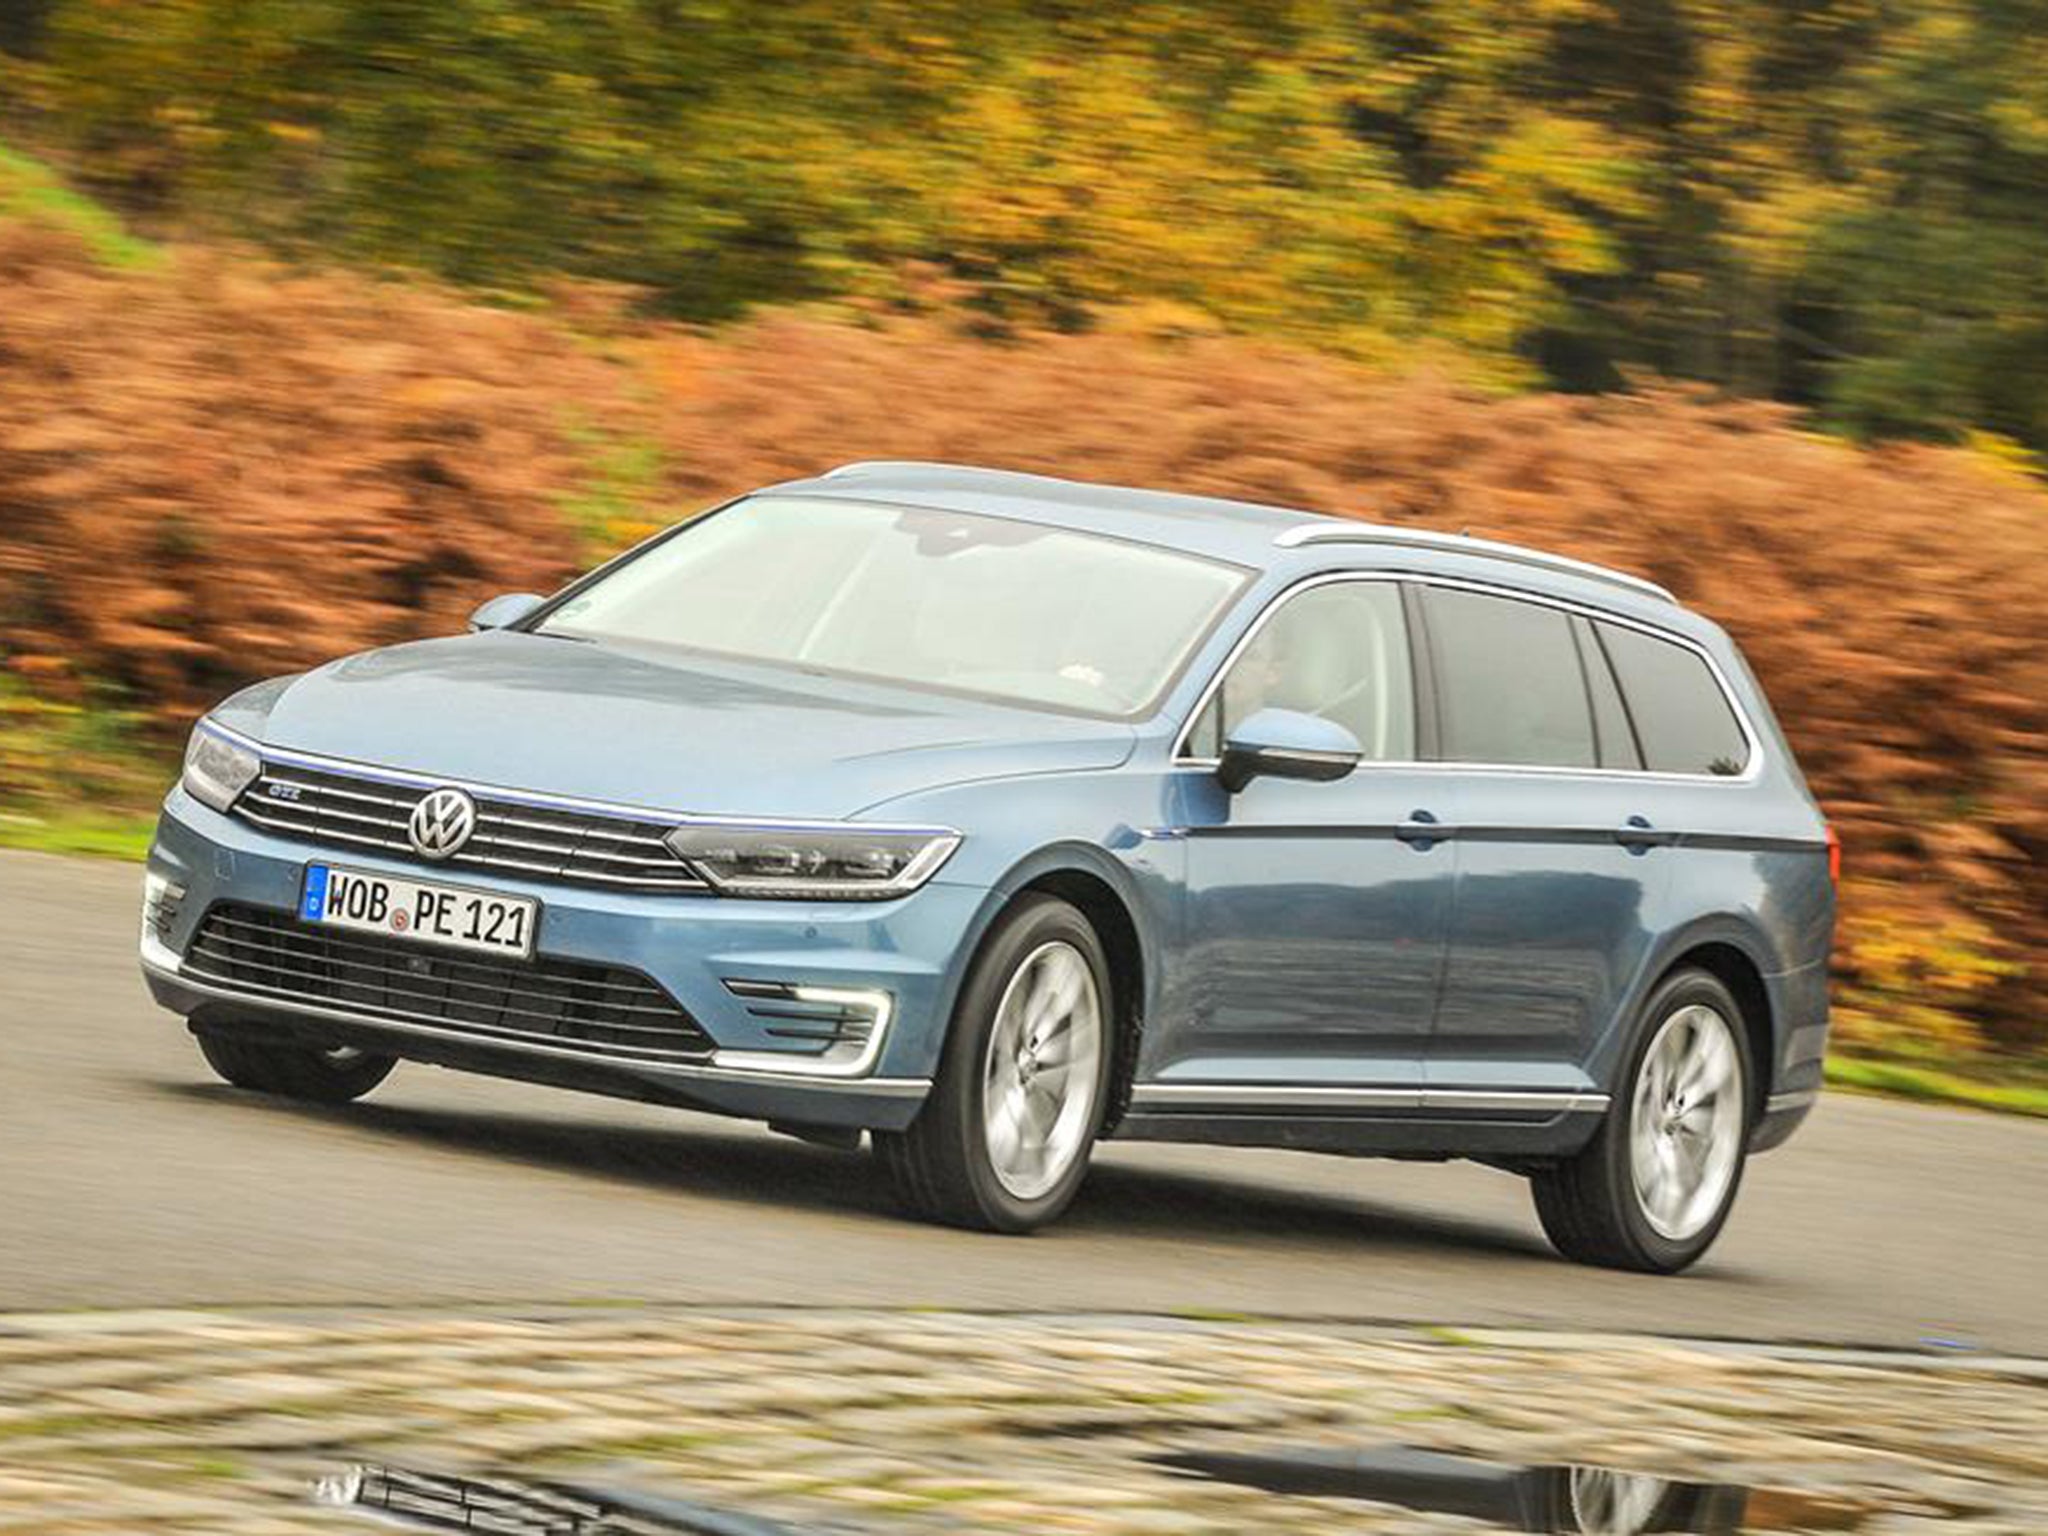 2015 Volkswagen Passat Estate GTE, car review: Expensive but just as good  as the rest of the range, The Independent